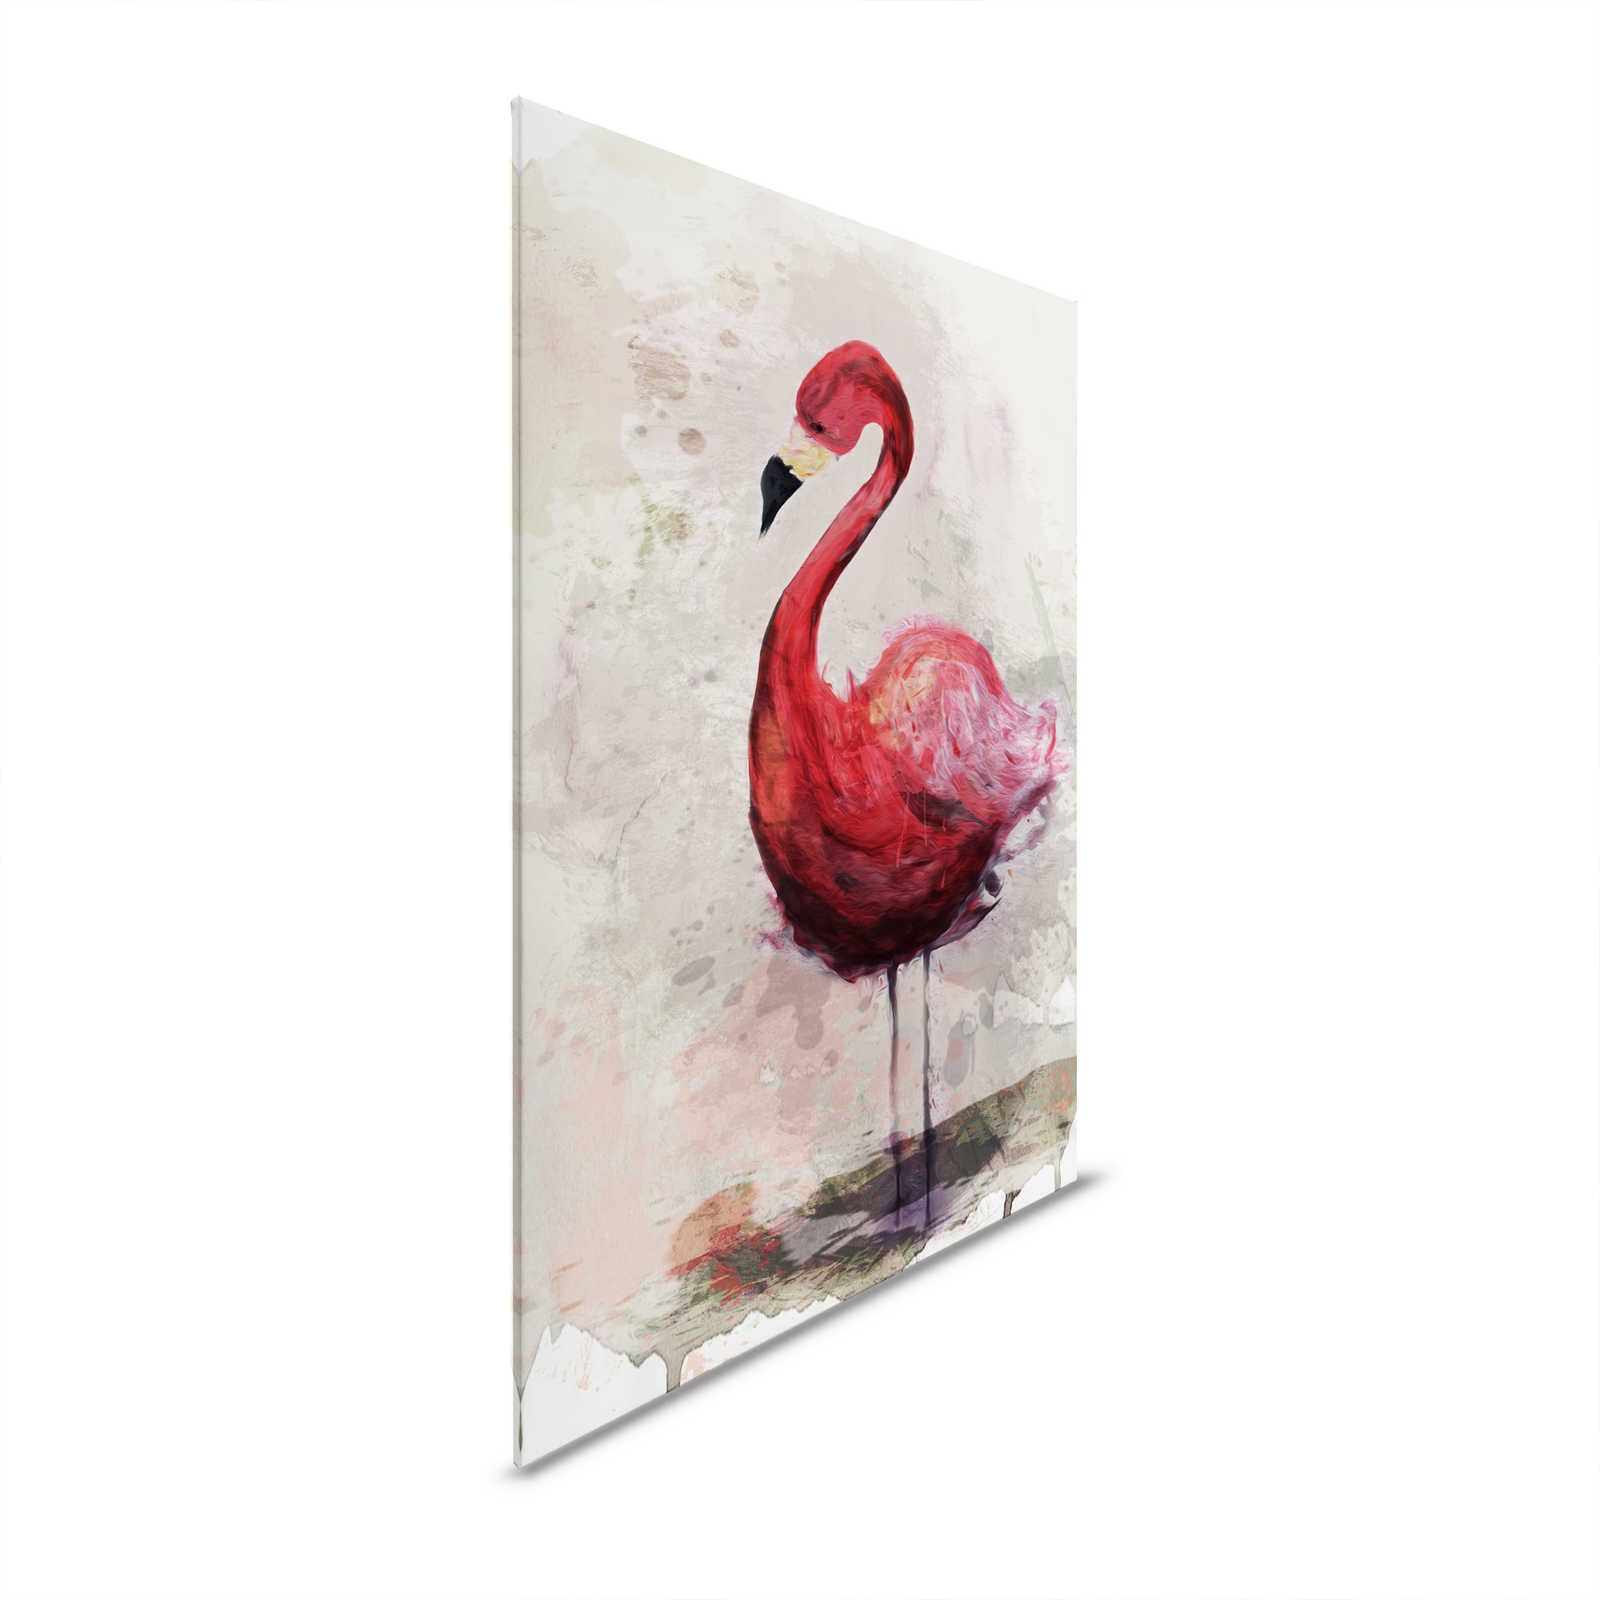 Watercolour Canvas Painting with Flamingo Motif in Drawing Style - 1.20 m x 0.80 m
